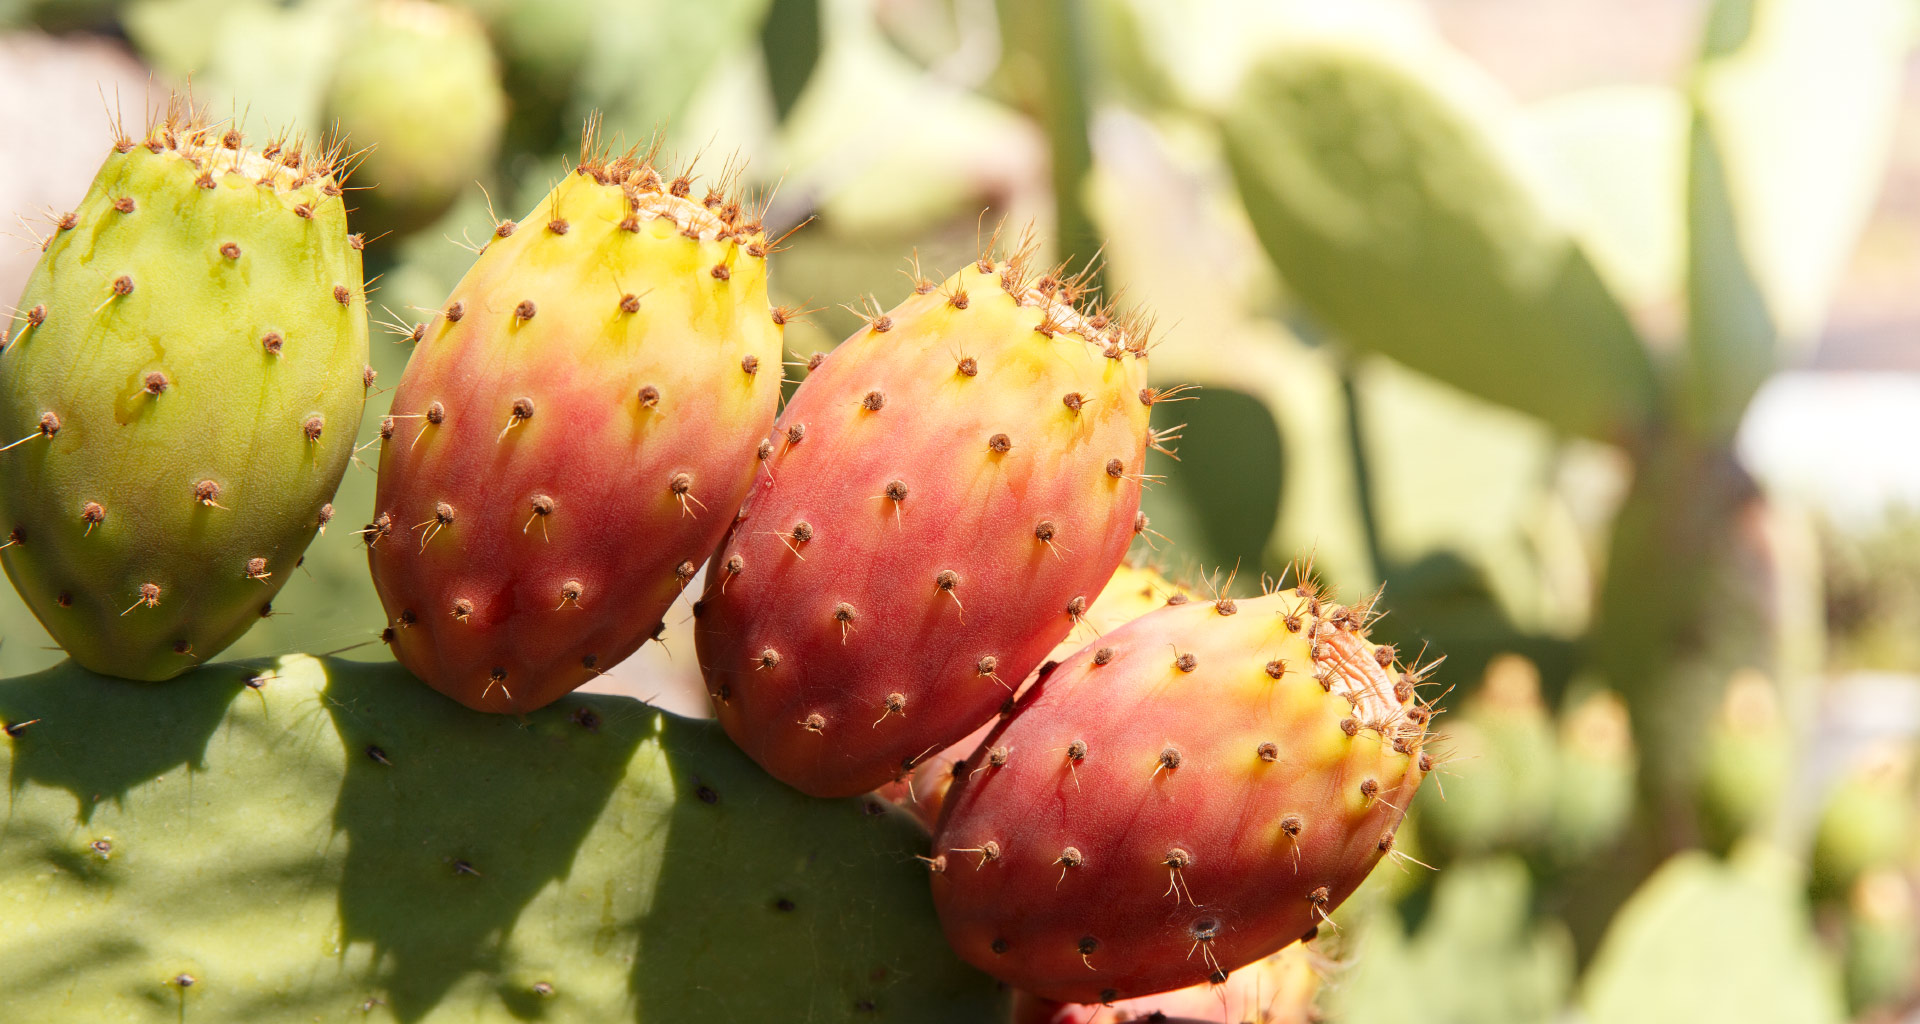 Thorny and fresh, discovering Prickly Pears